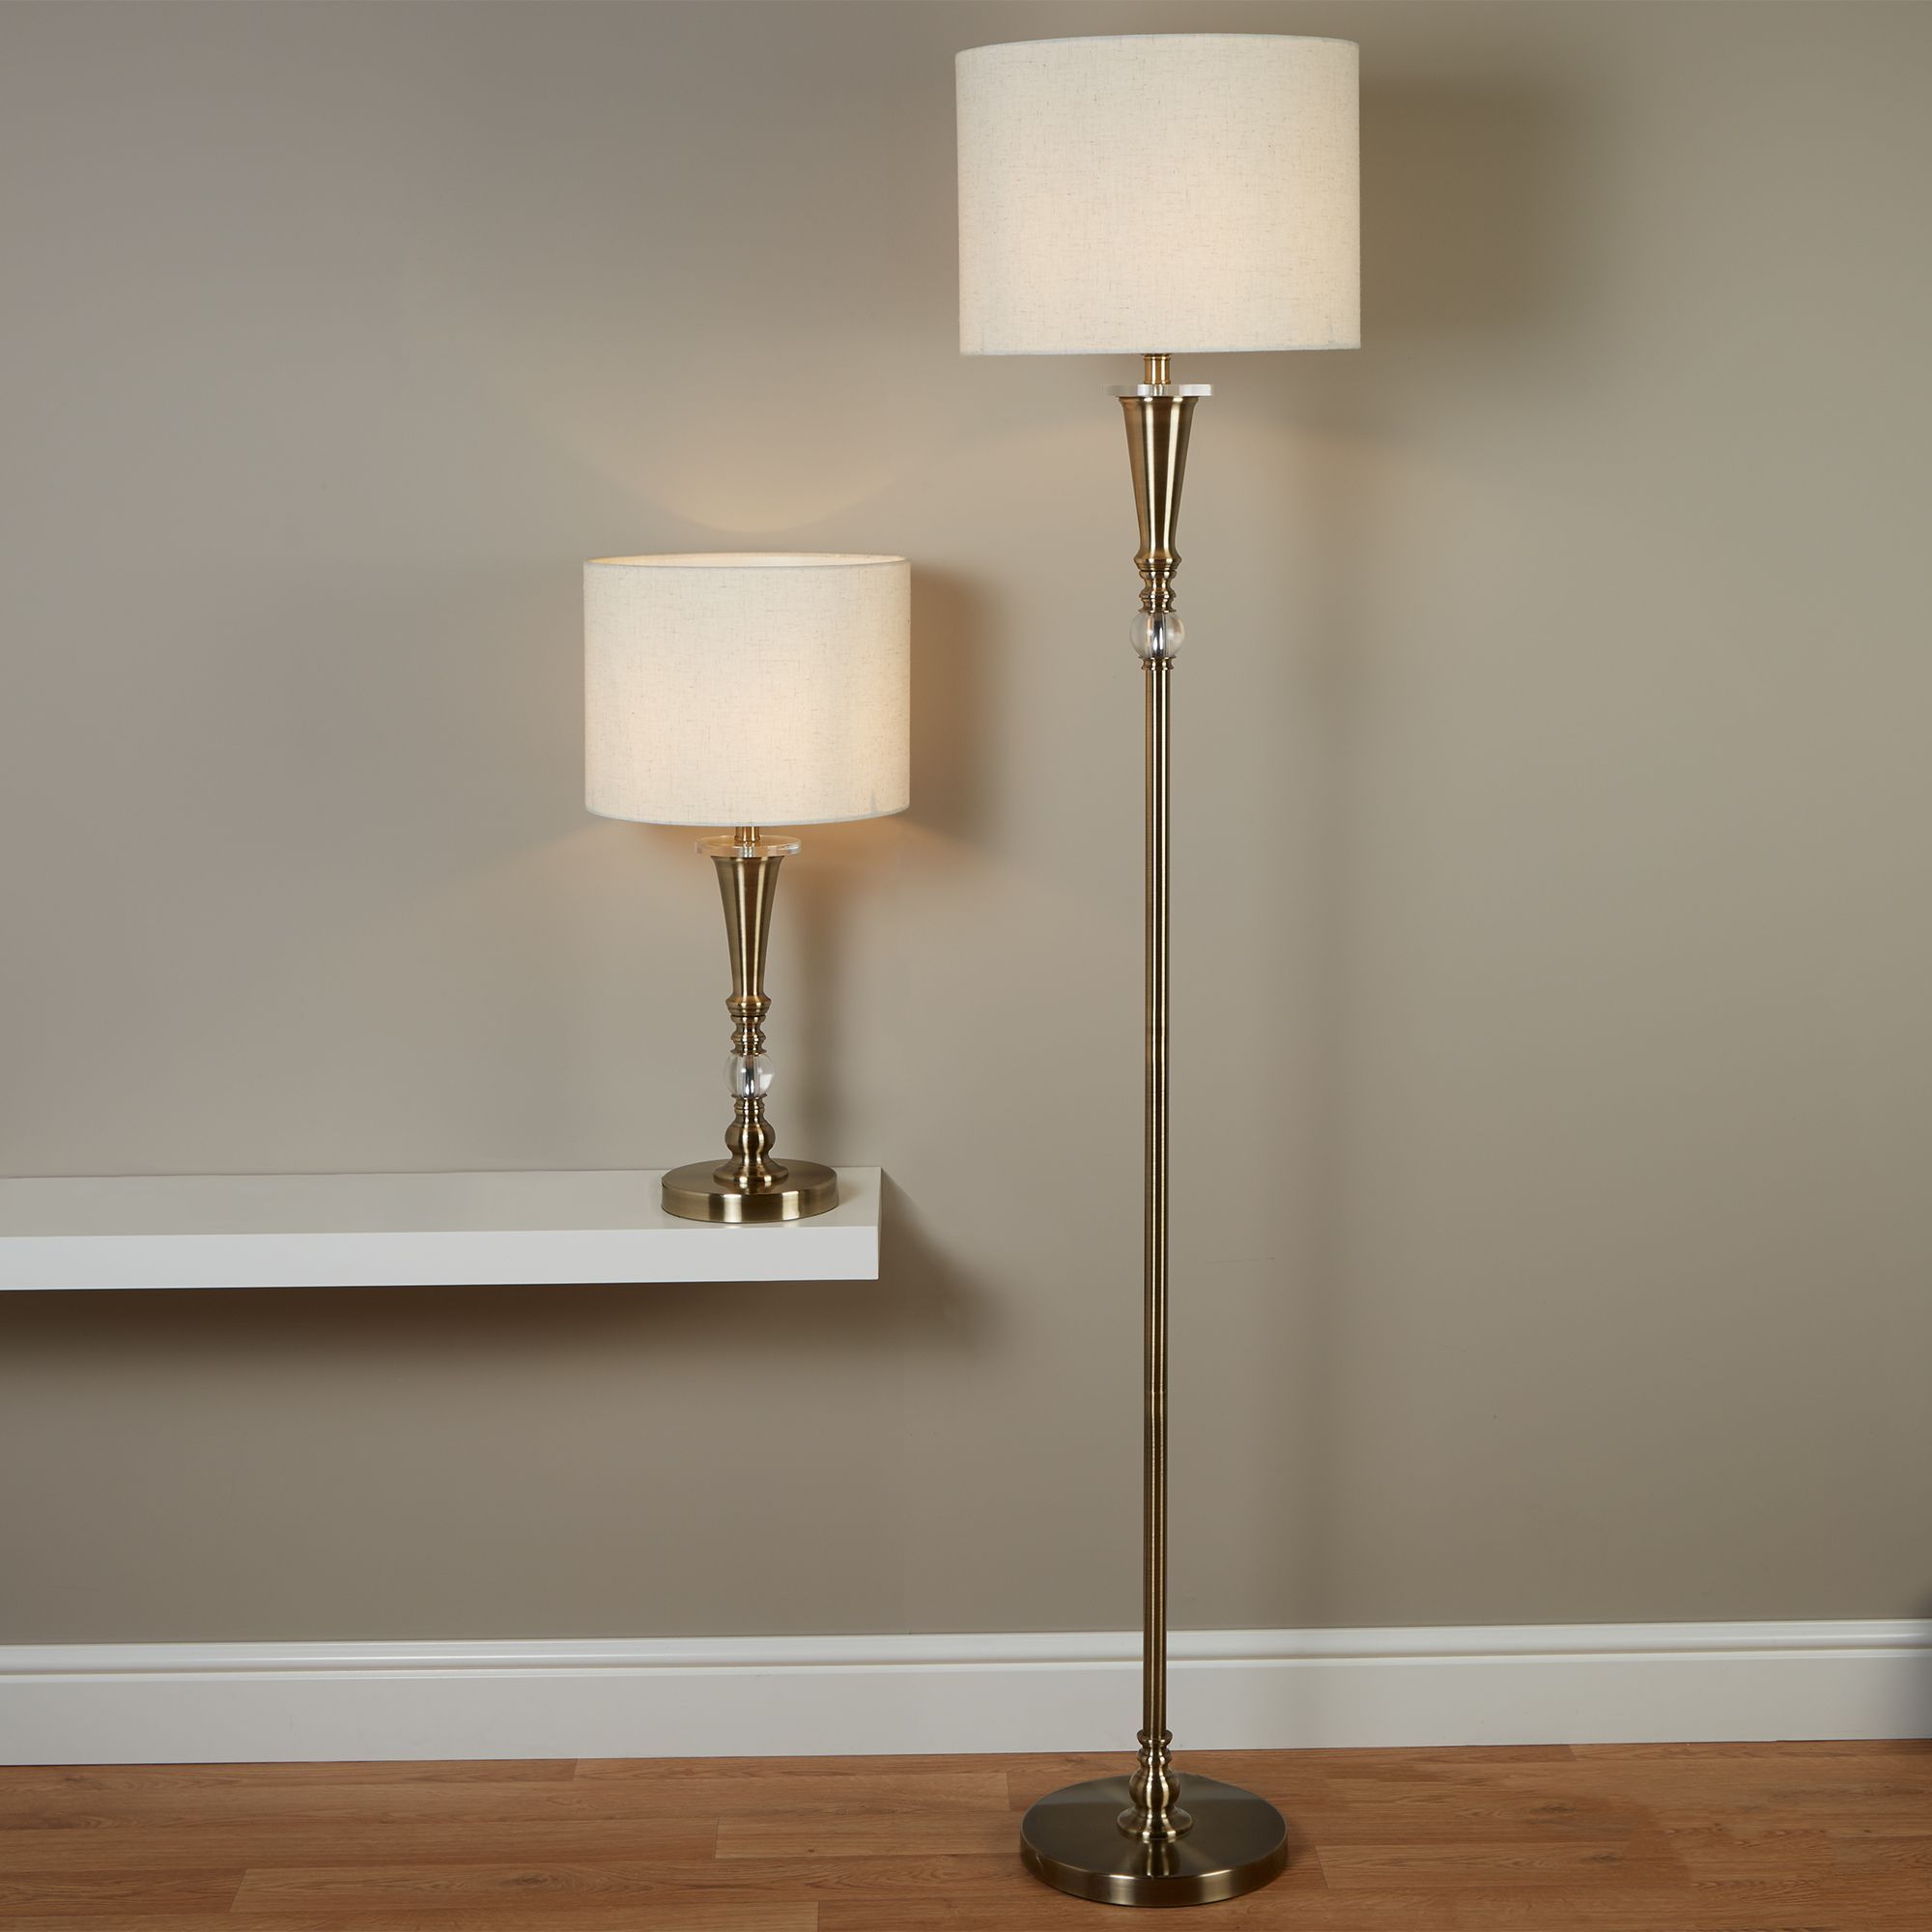 Searchlight Lighting 1012Ab Drum Single Light Floor Lamp Inside Oatmeal Linen Shade Chandeliers (View 12 of 15)